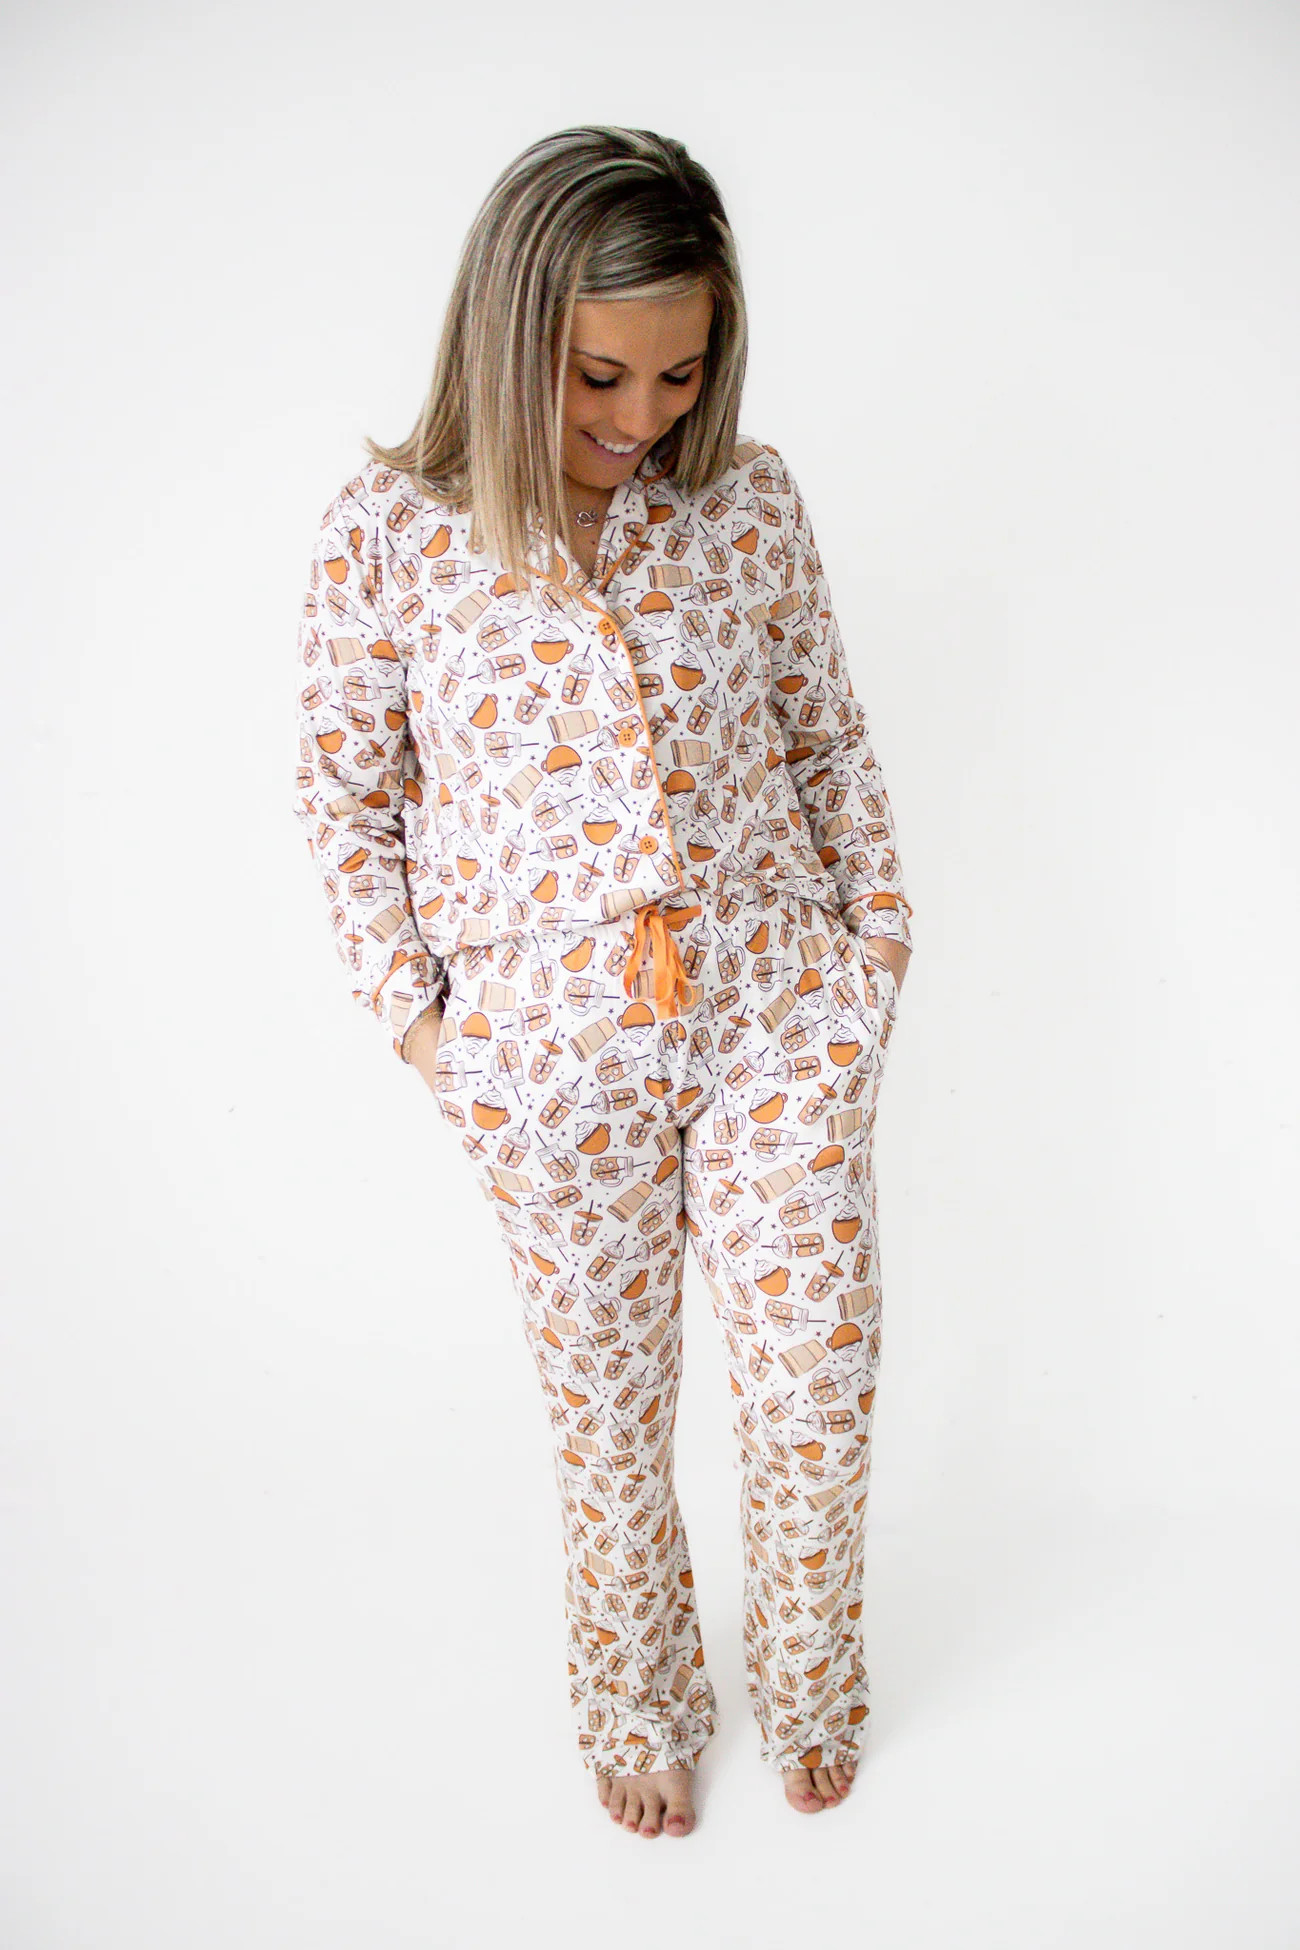 RISE AND GRIND WOMEN’S RELAXED FLARE DREAM SET | DREAM BIG LITTLE CO